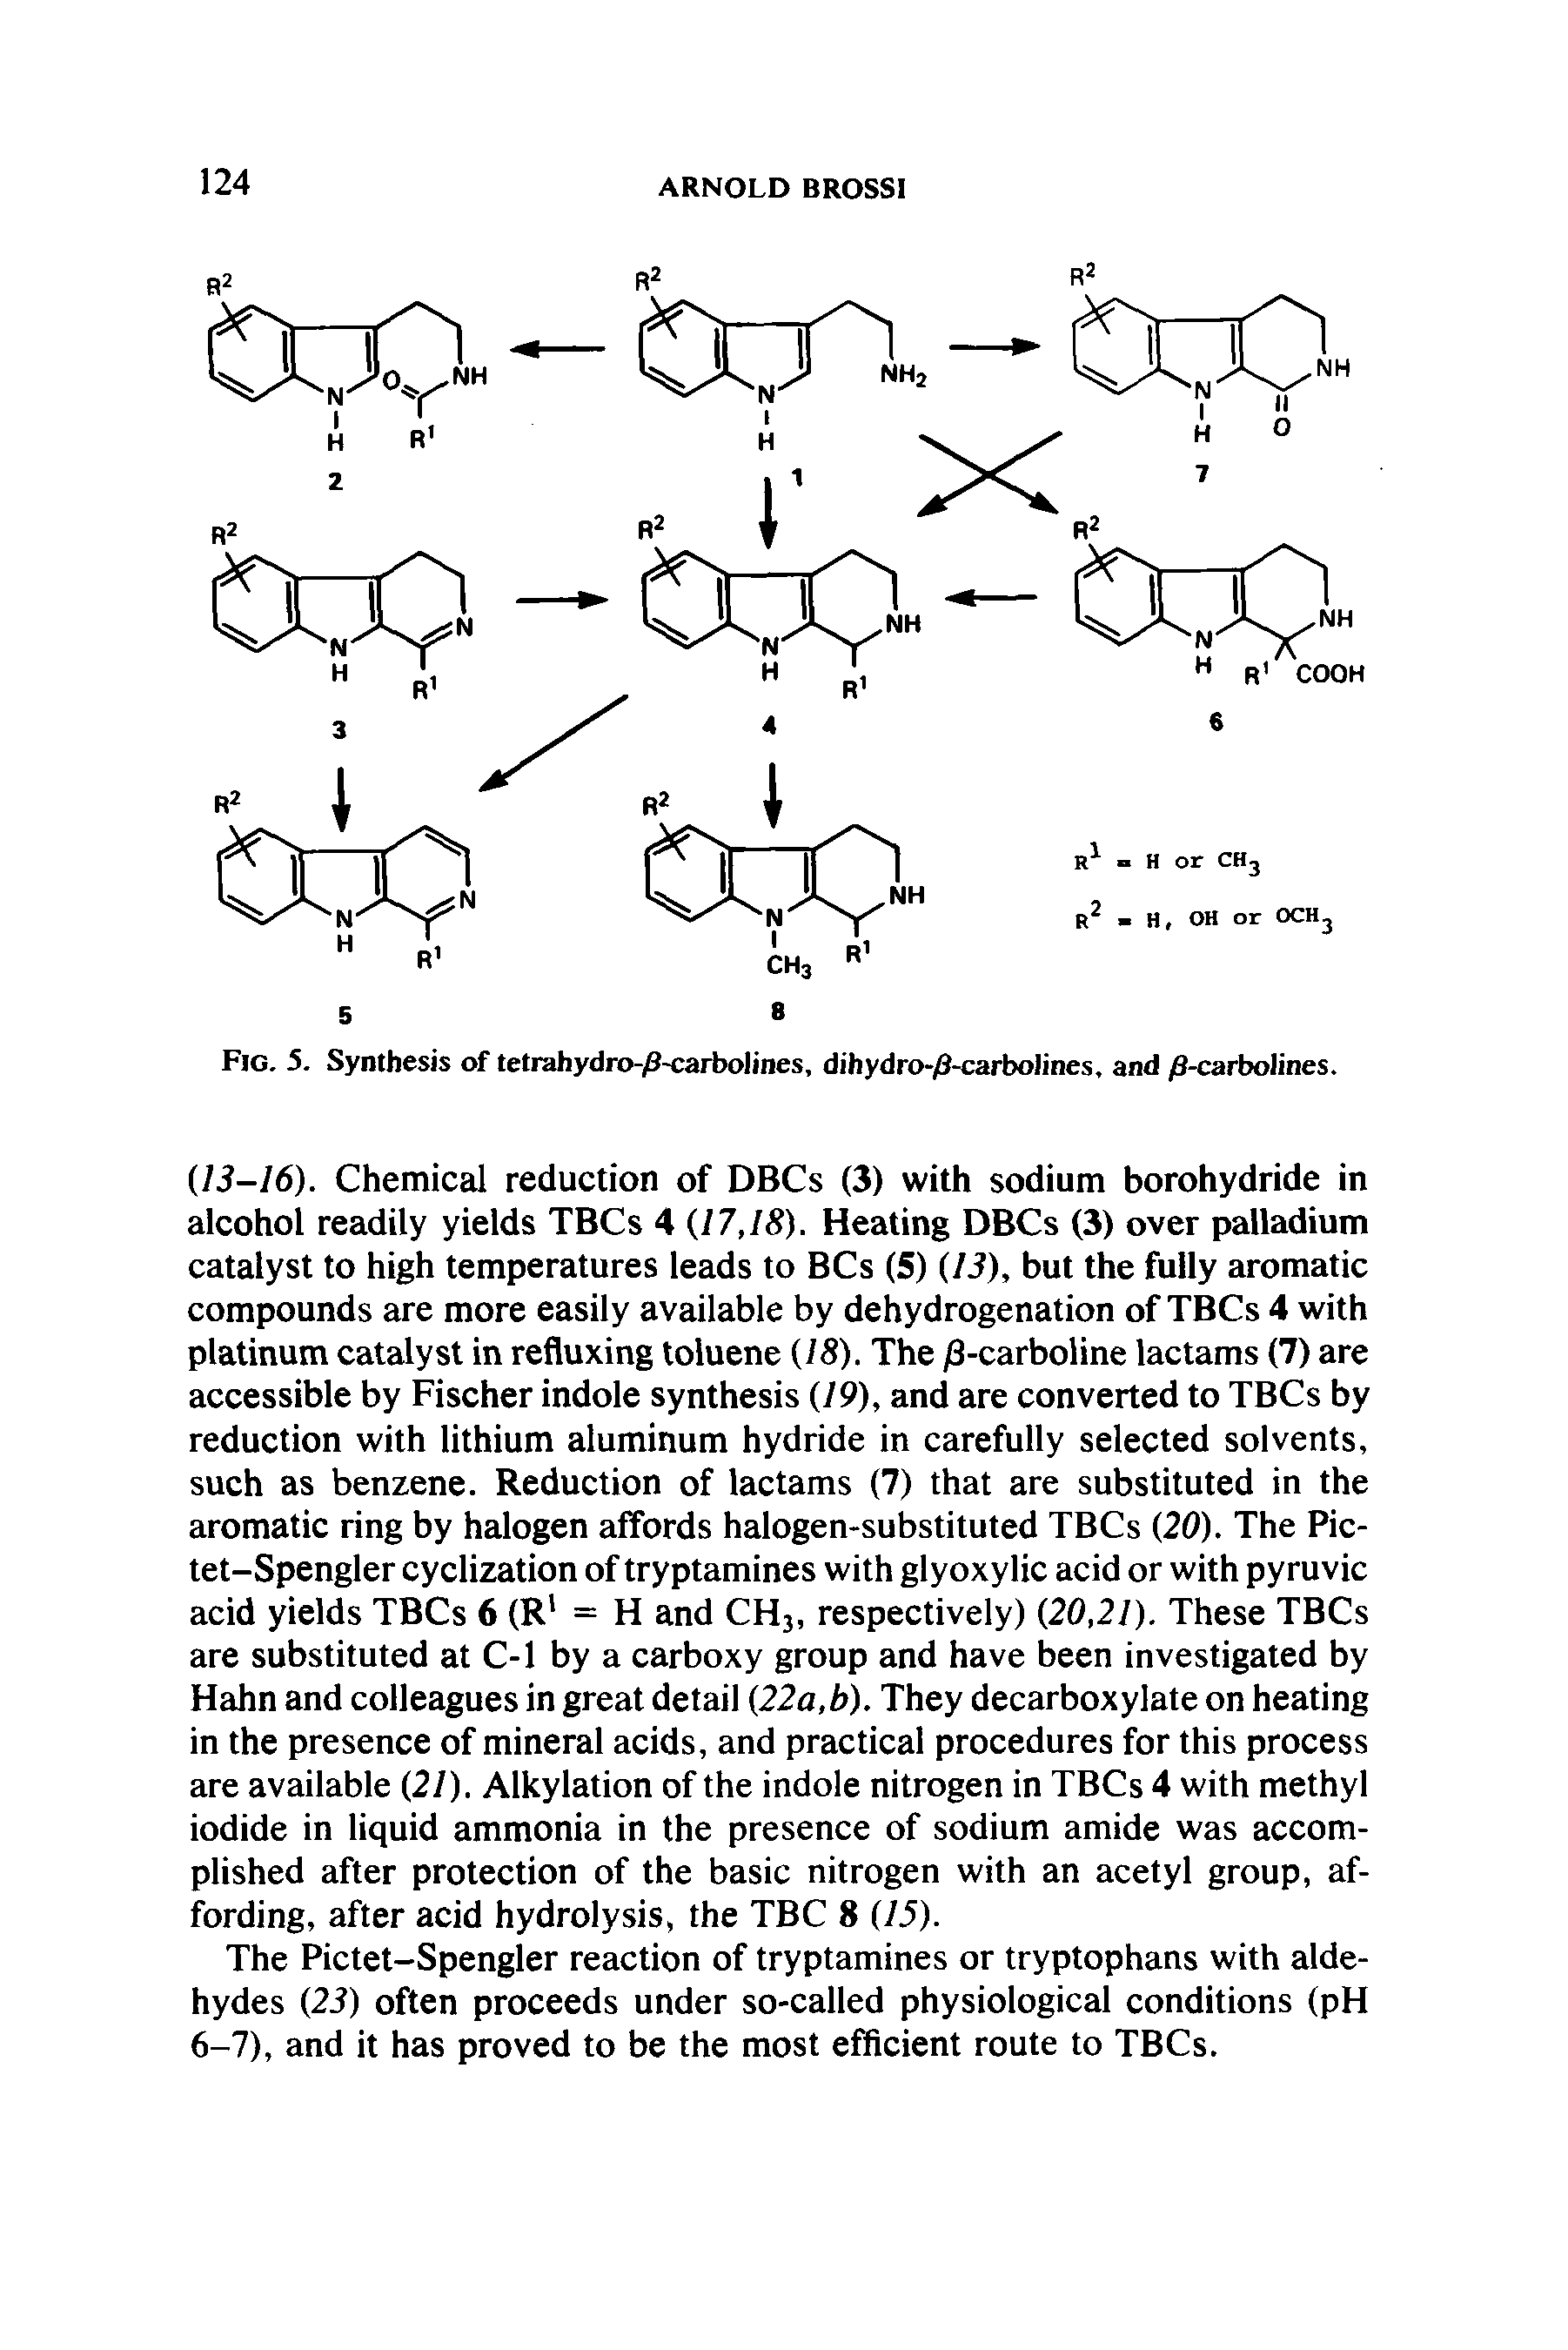 Fig. 5. Synthesis of tetrahydro-zS-carbolines. dihydro-/3-carbolines. and /3-carbolines.